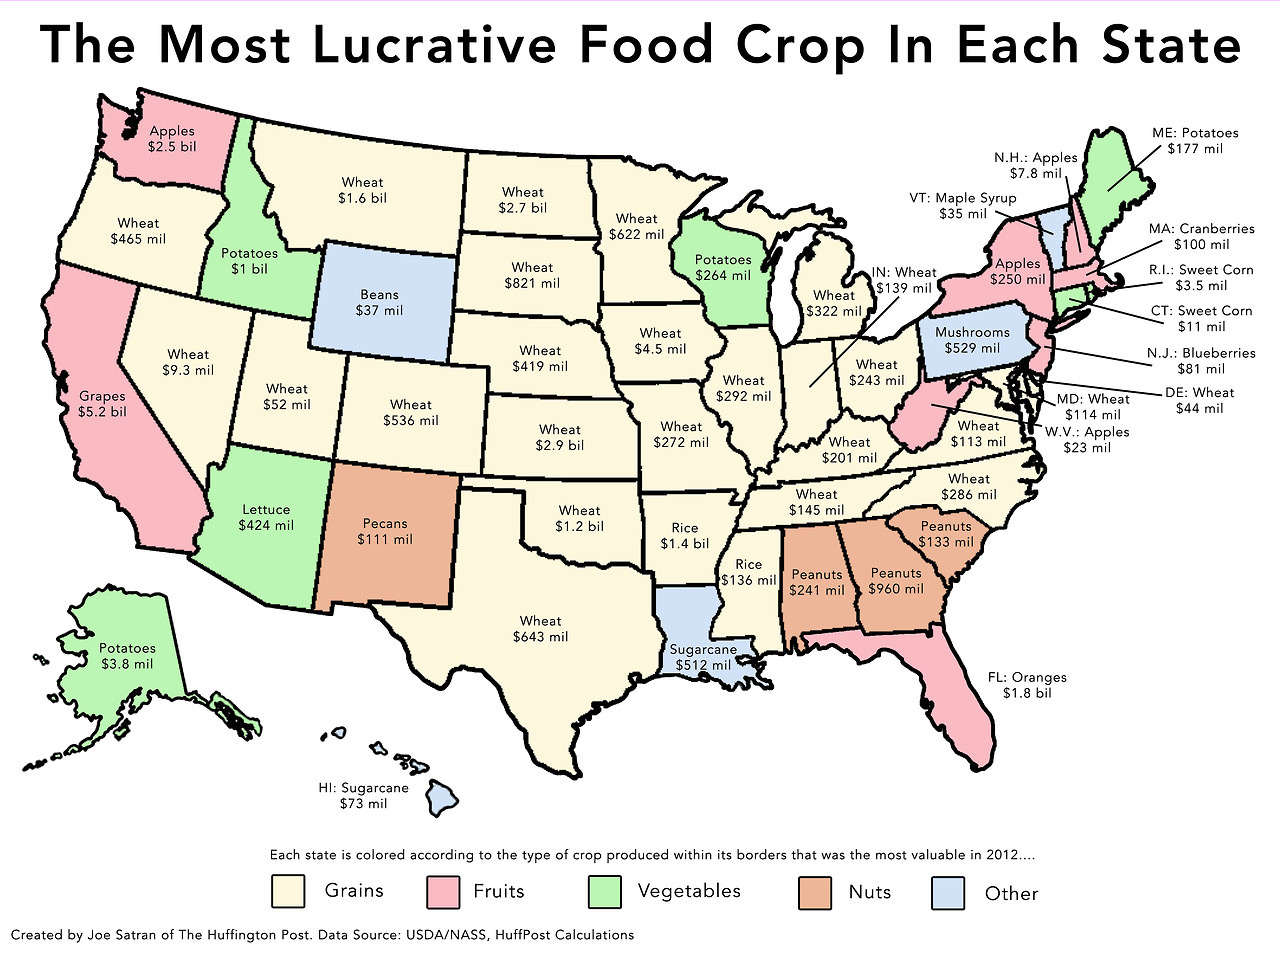 The most lucrative food crop produced in each state in the United States. Map crated by Joe Satran of The Huffington Post with data from the USDA and NASS.